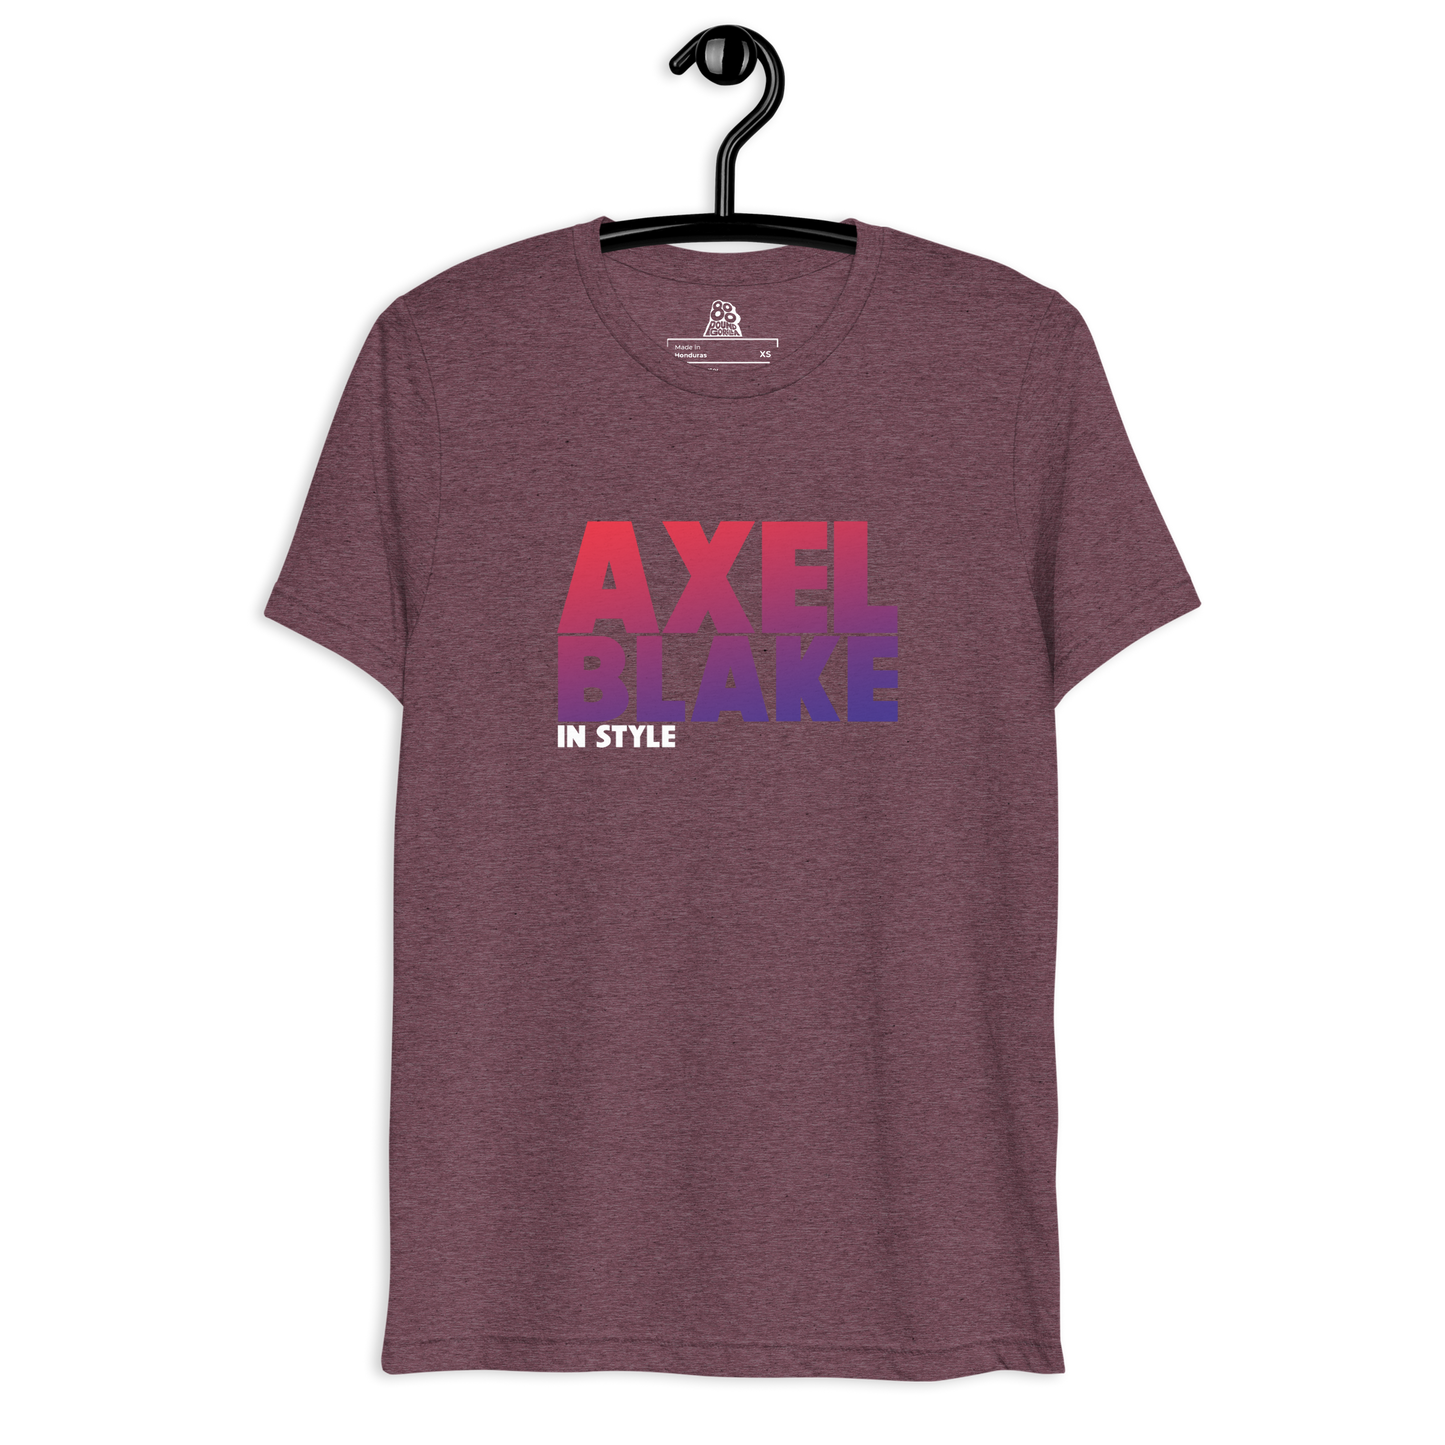 Axel Blake - In Style - Short sleeve t-shirt